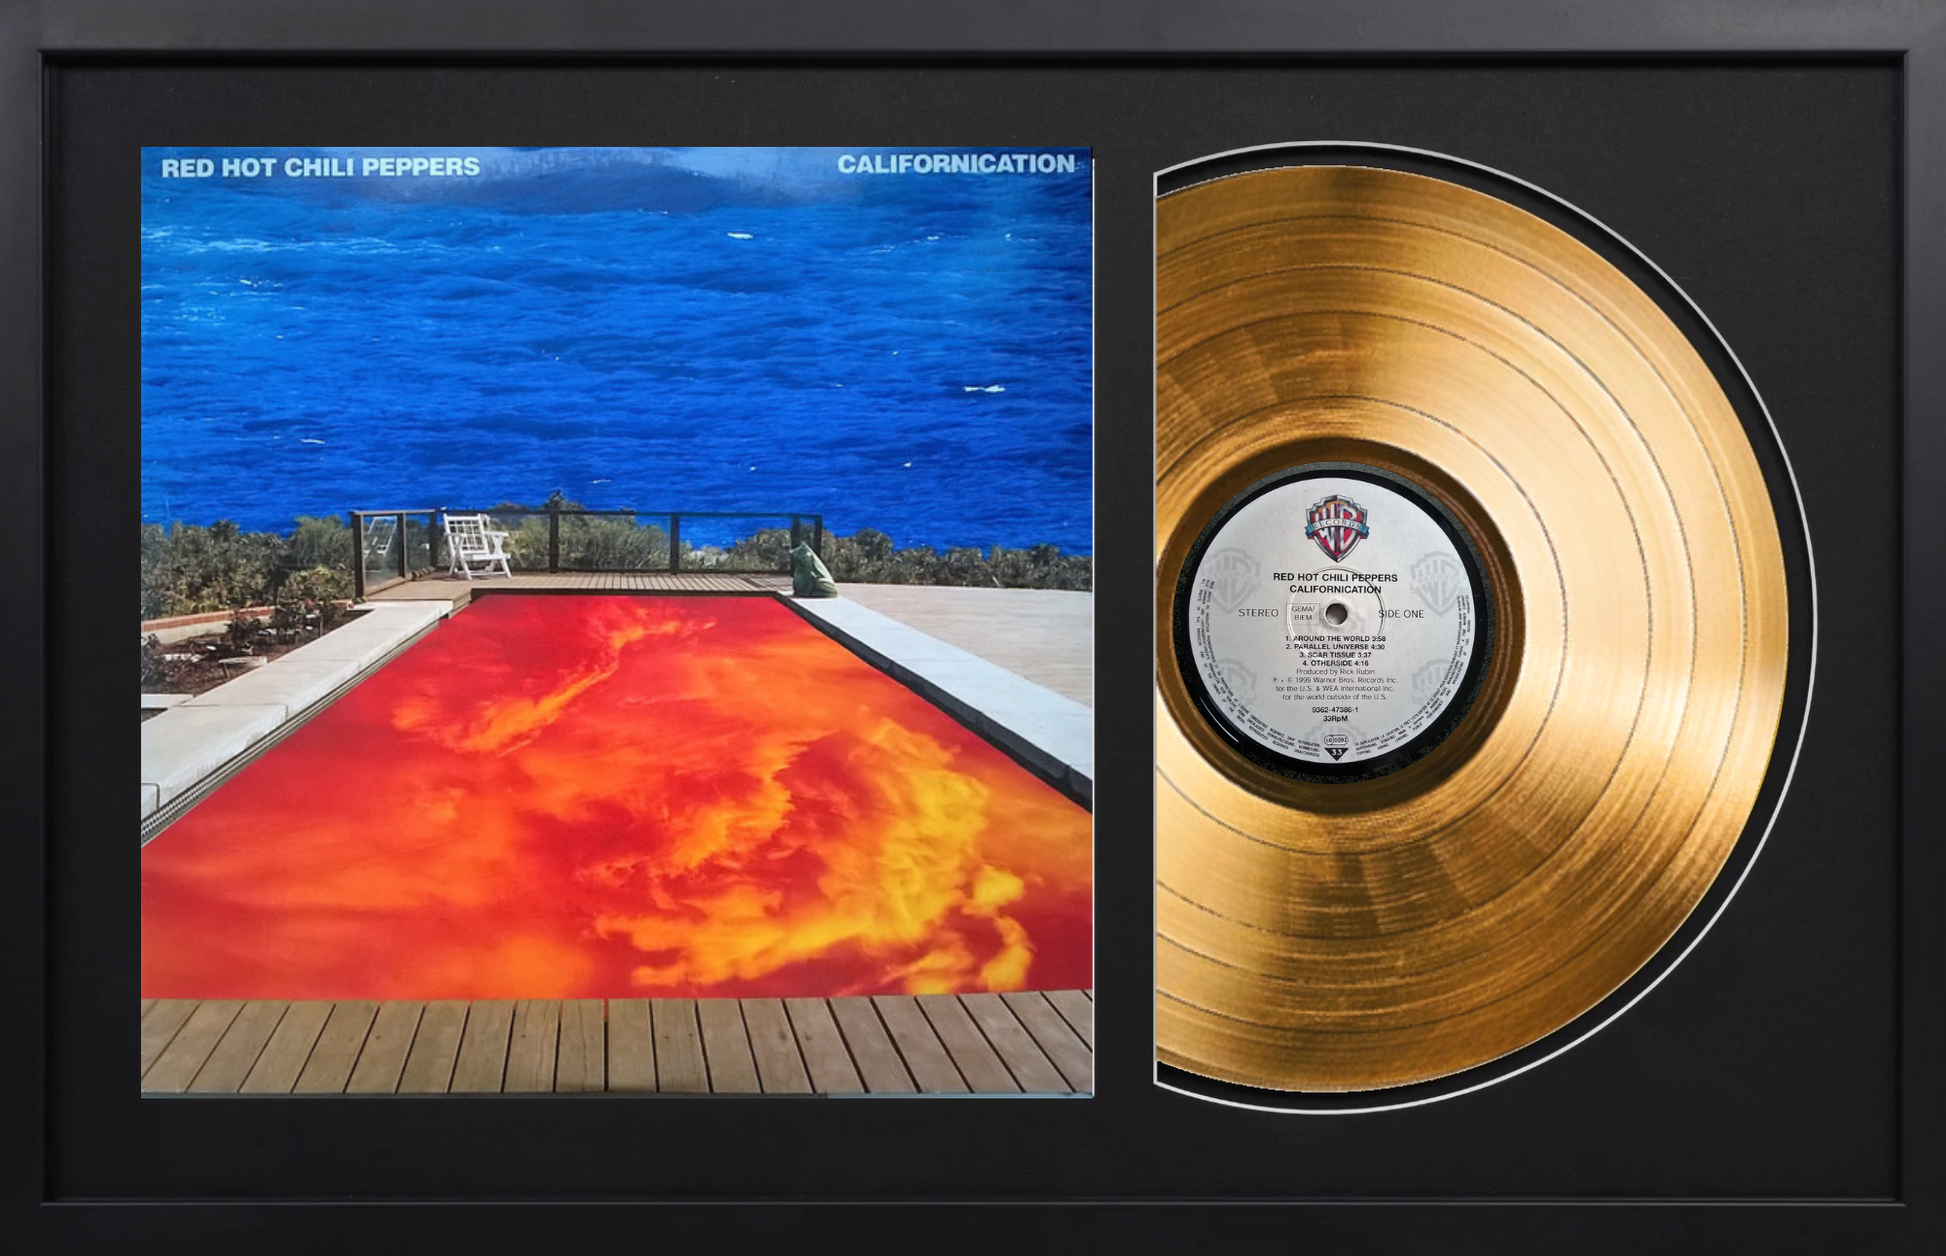 Red Hot Chili Peppers - Californication - 14K Gold Plated, Limited Edition  Album